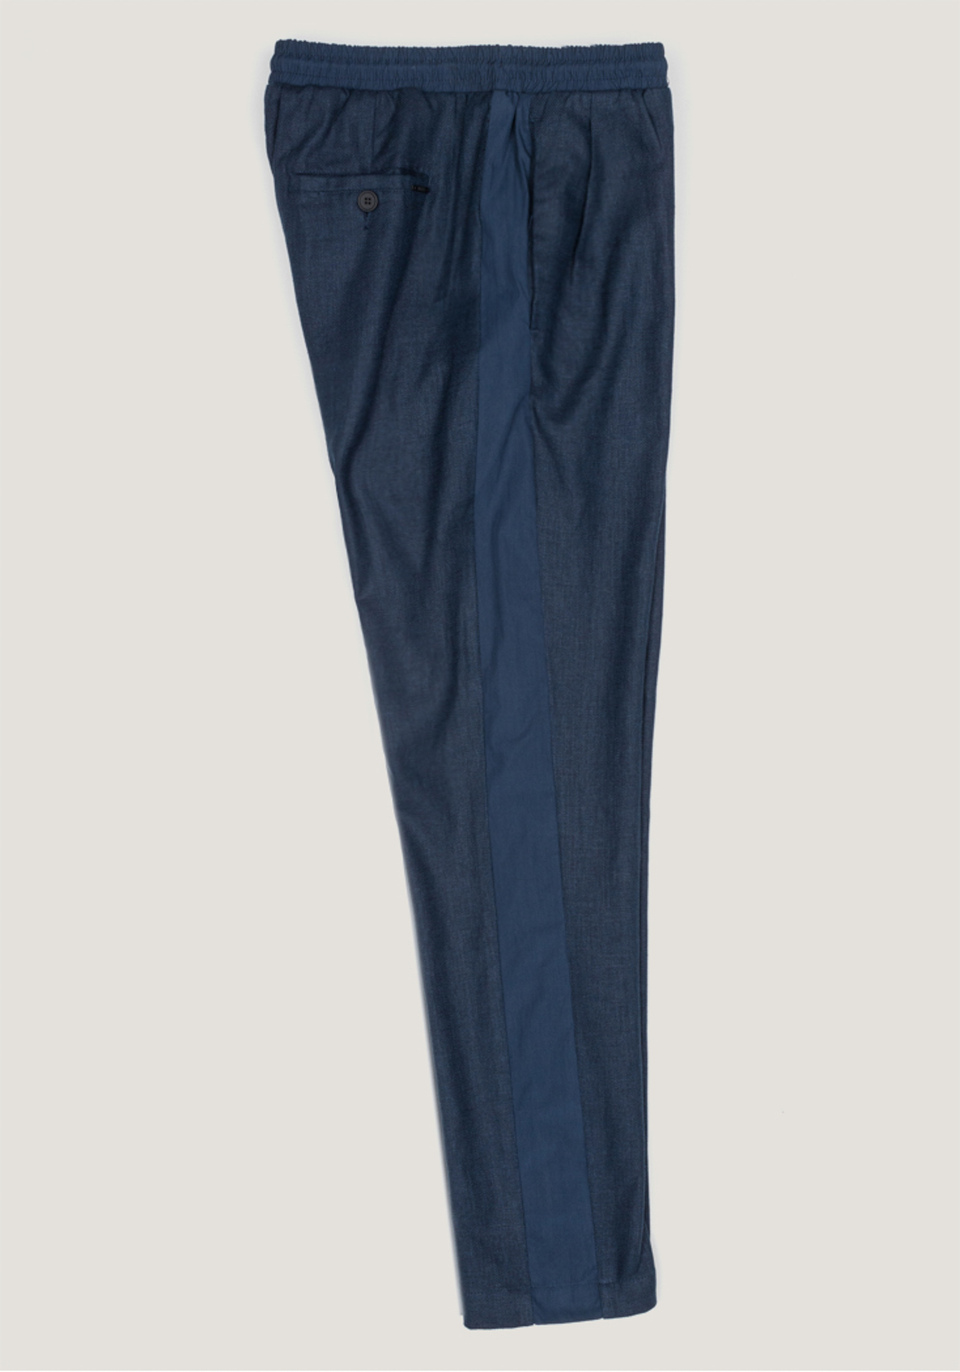 CARROT-FIT TROUSERS IN A LINEN-VISCOSE BLEND WITH TONAL SIDE-BAND DETAILING - Antony Morato Online Shop